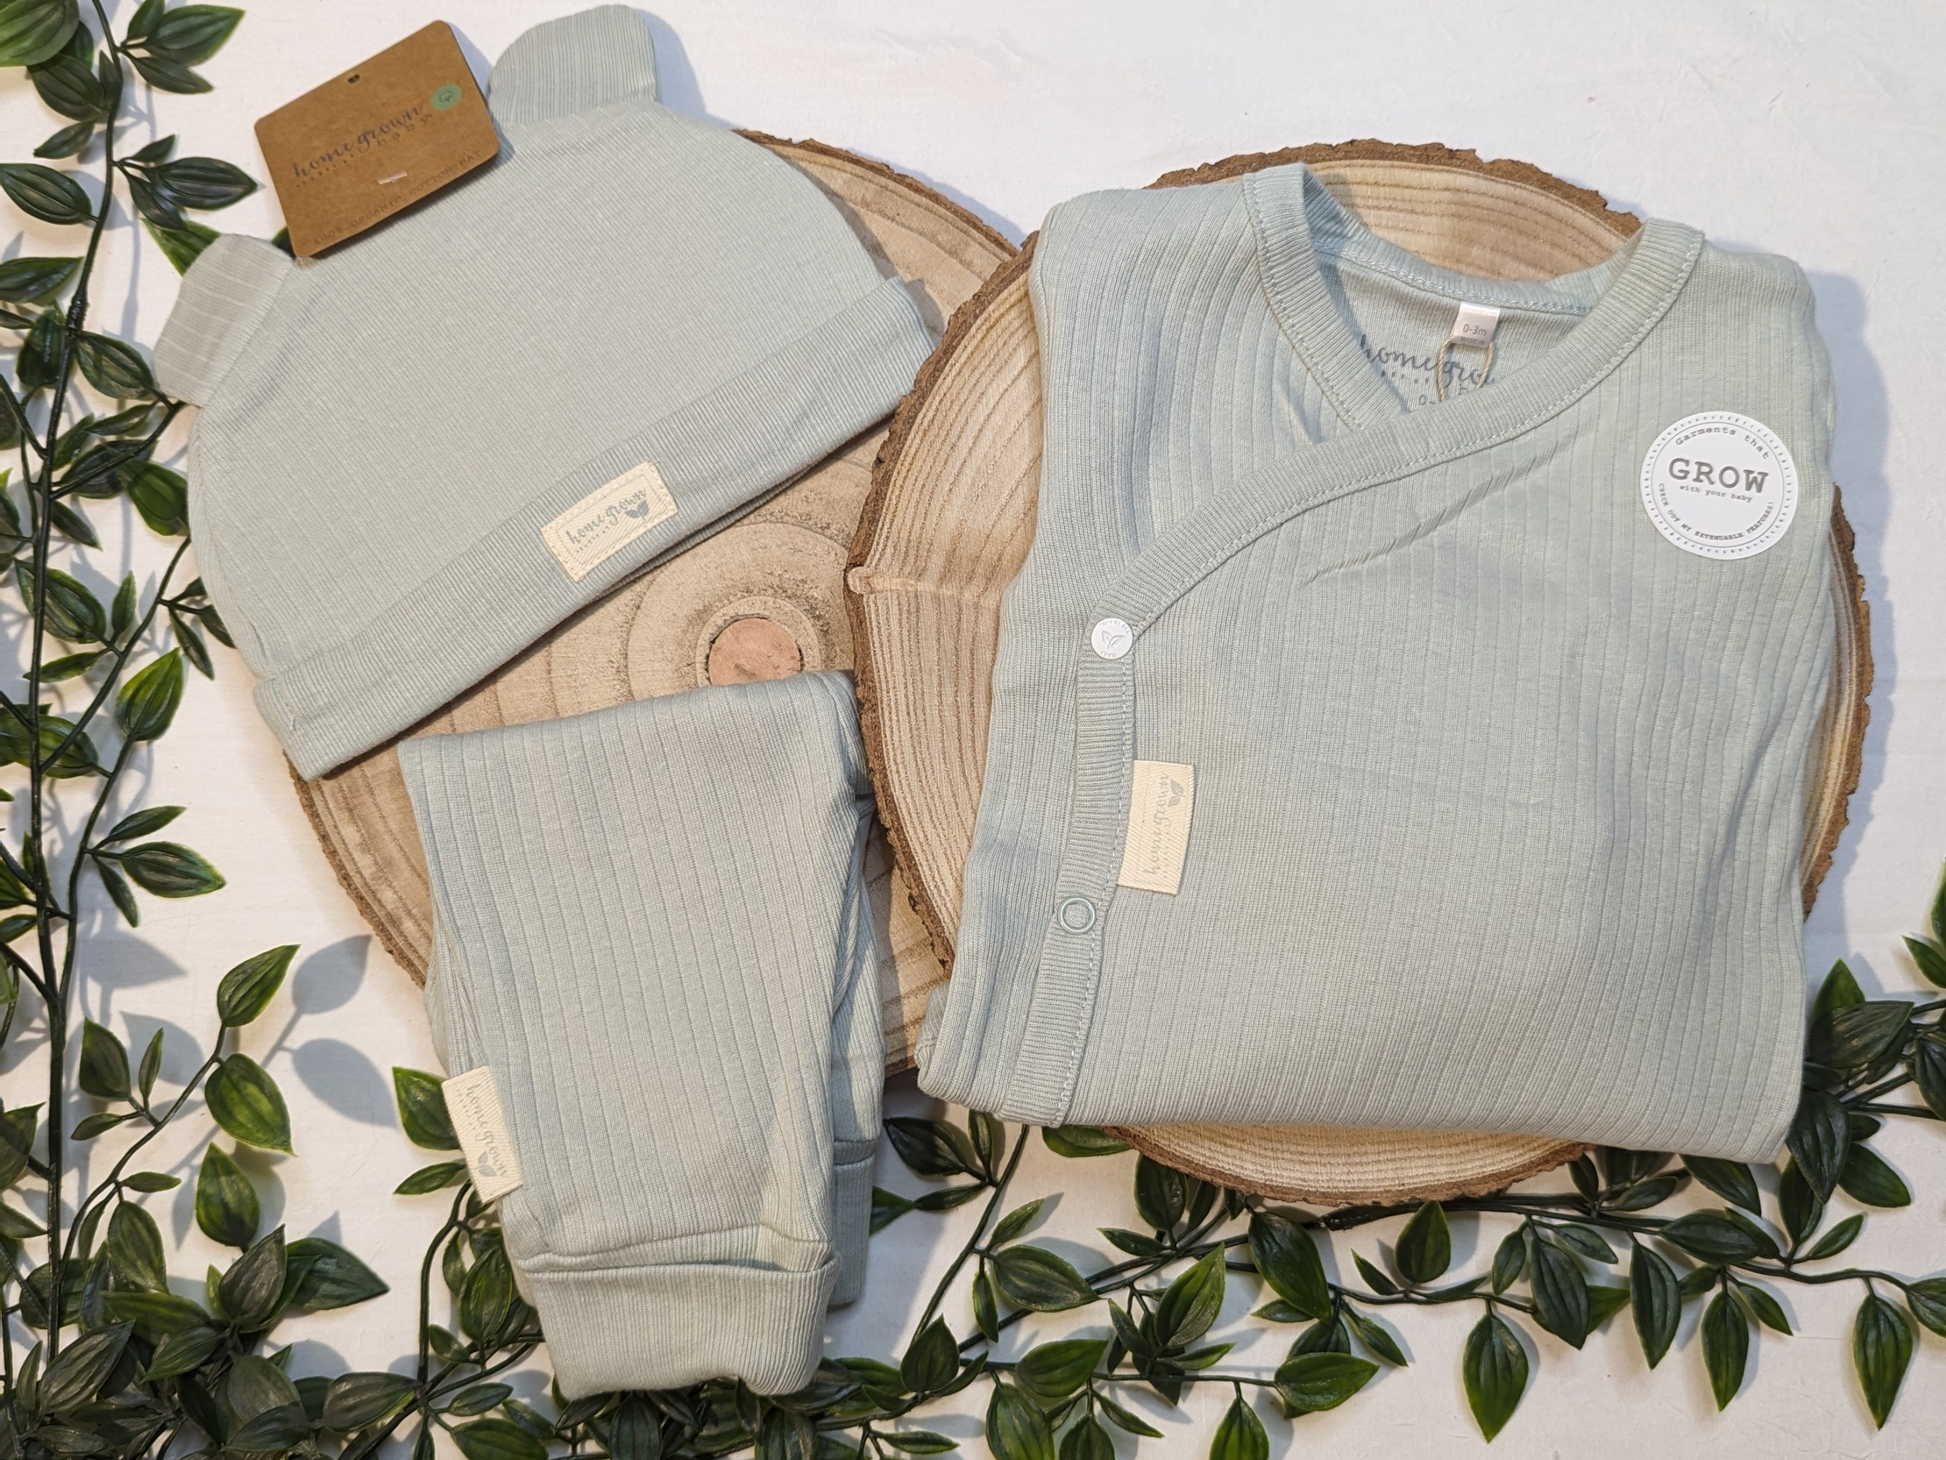 Sage unisex organic cotton baby clothes set with bodysuit, trousers, and bear hat. Designed for comfort, growth, and sustainability by Homegrown Baby.